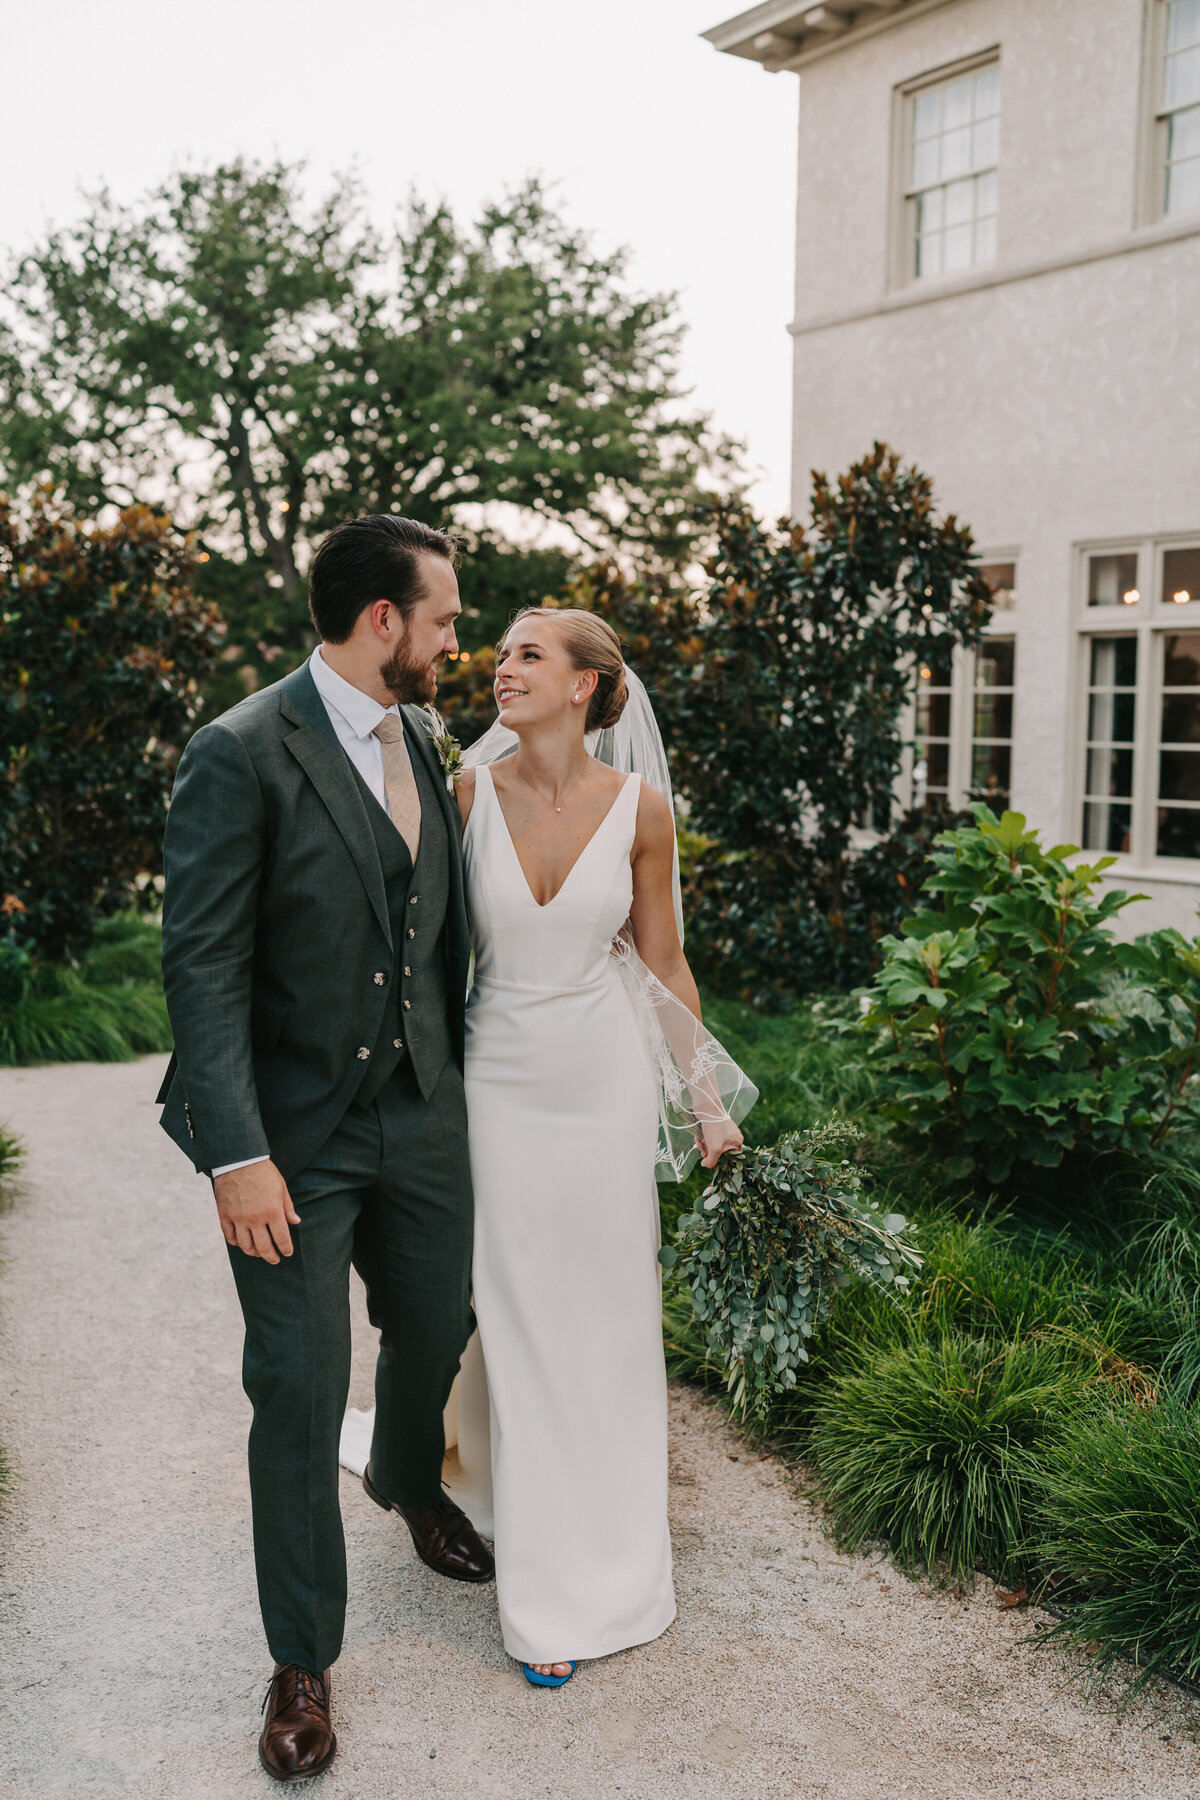 A photograph in color of Colby and Jack on their wedding day at Commodore Perry Estate in Austin, Texas. The photograph shows the couple walking arm in arm while they look at each other, smiling. The bride is wearing a classic white satin wedding gown, blue high heeled shoes and a fingertip length veil with her light hair pulled back in a bun. The groom is wearing a dark gray three piece suit with a blush colored tie. There is a tall oak tree in the distance, two small magnolia trees and other green shrubs on either side of the gravel path they are walking on. On the right, is the side of a historical mansion with off-white stucco and tall windows with square panes. Wedding photography by Stacie McChesney/Vitae Weddings.